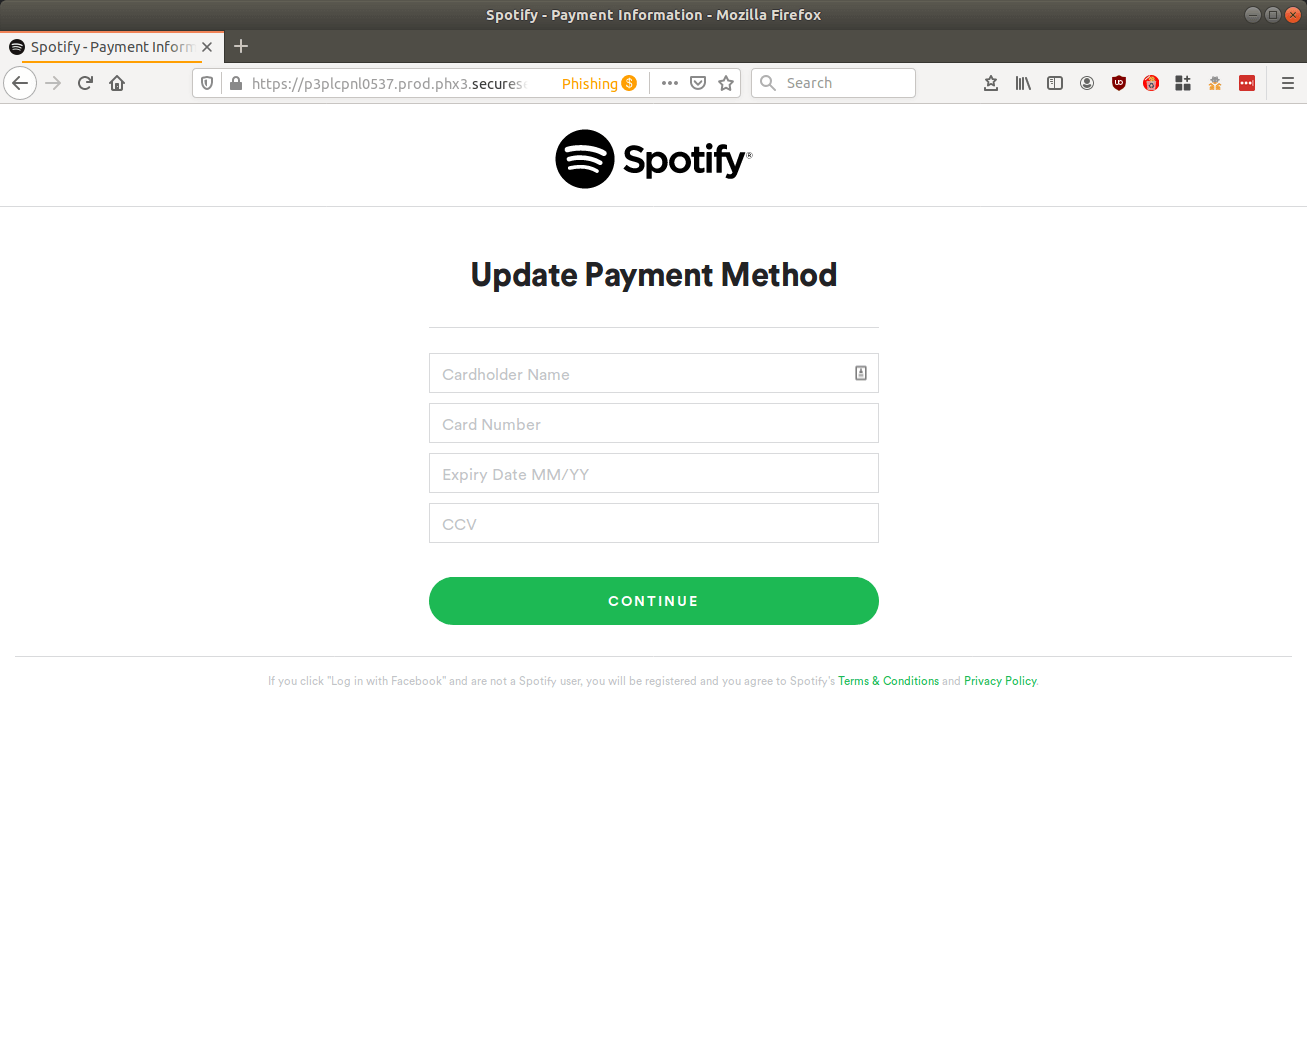 Spotify-Payment-Information-Mozilla-Firefox_172-003.png